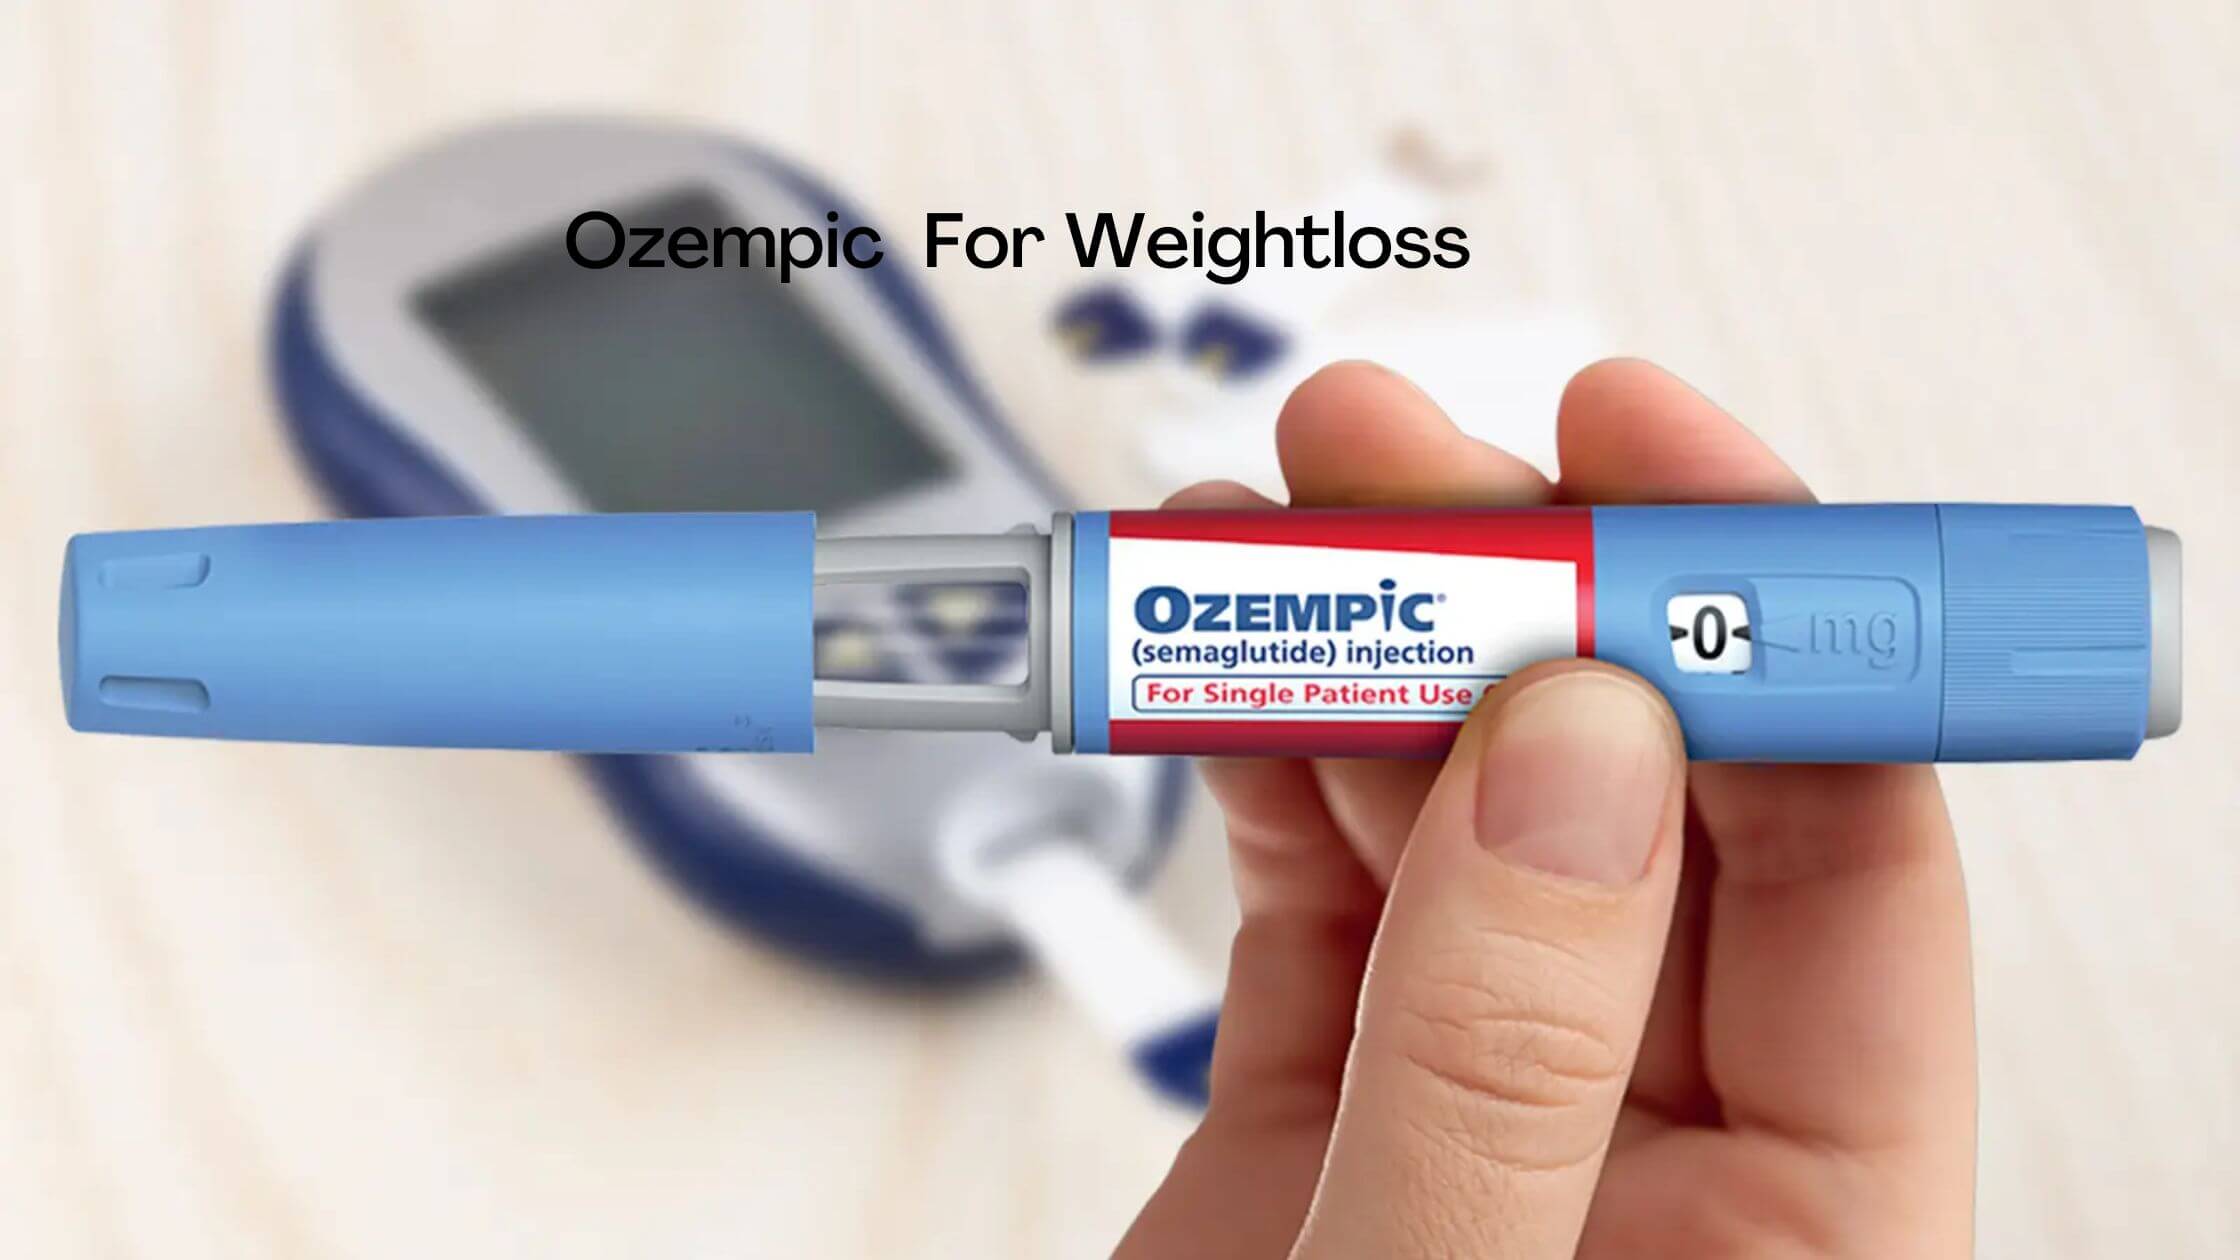 What Makes Ozempic So Effective For Weight Loss